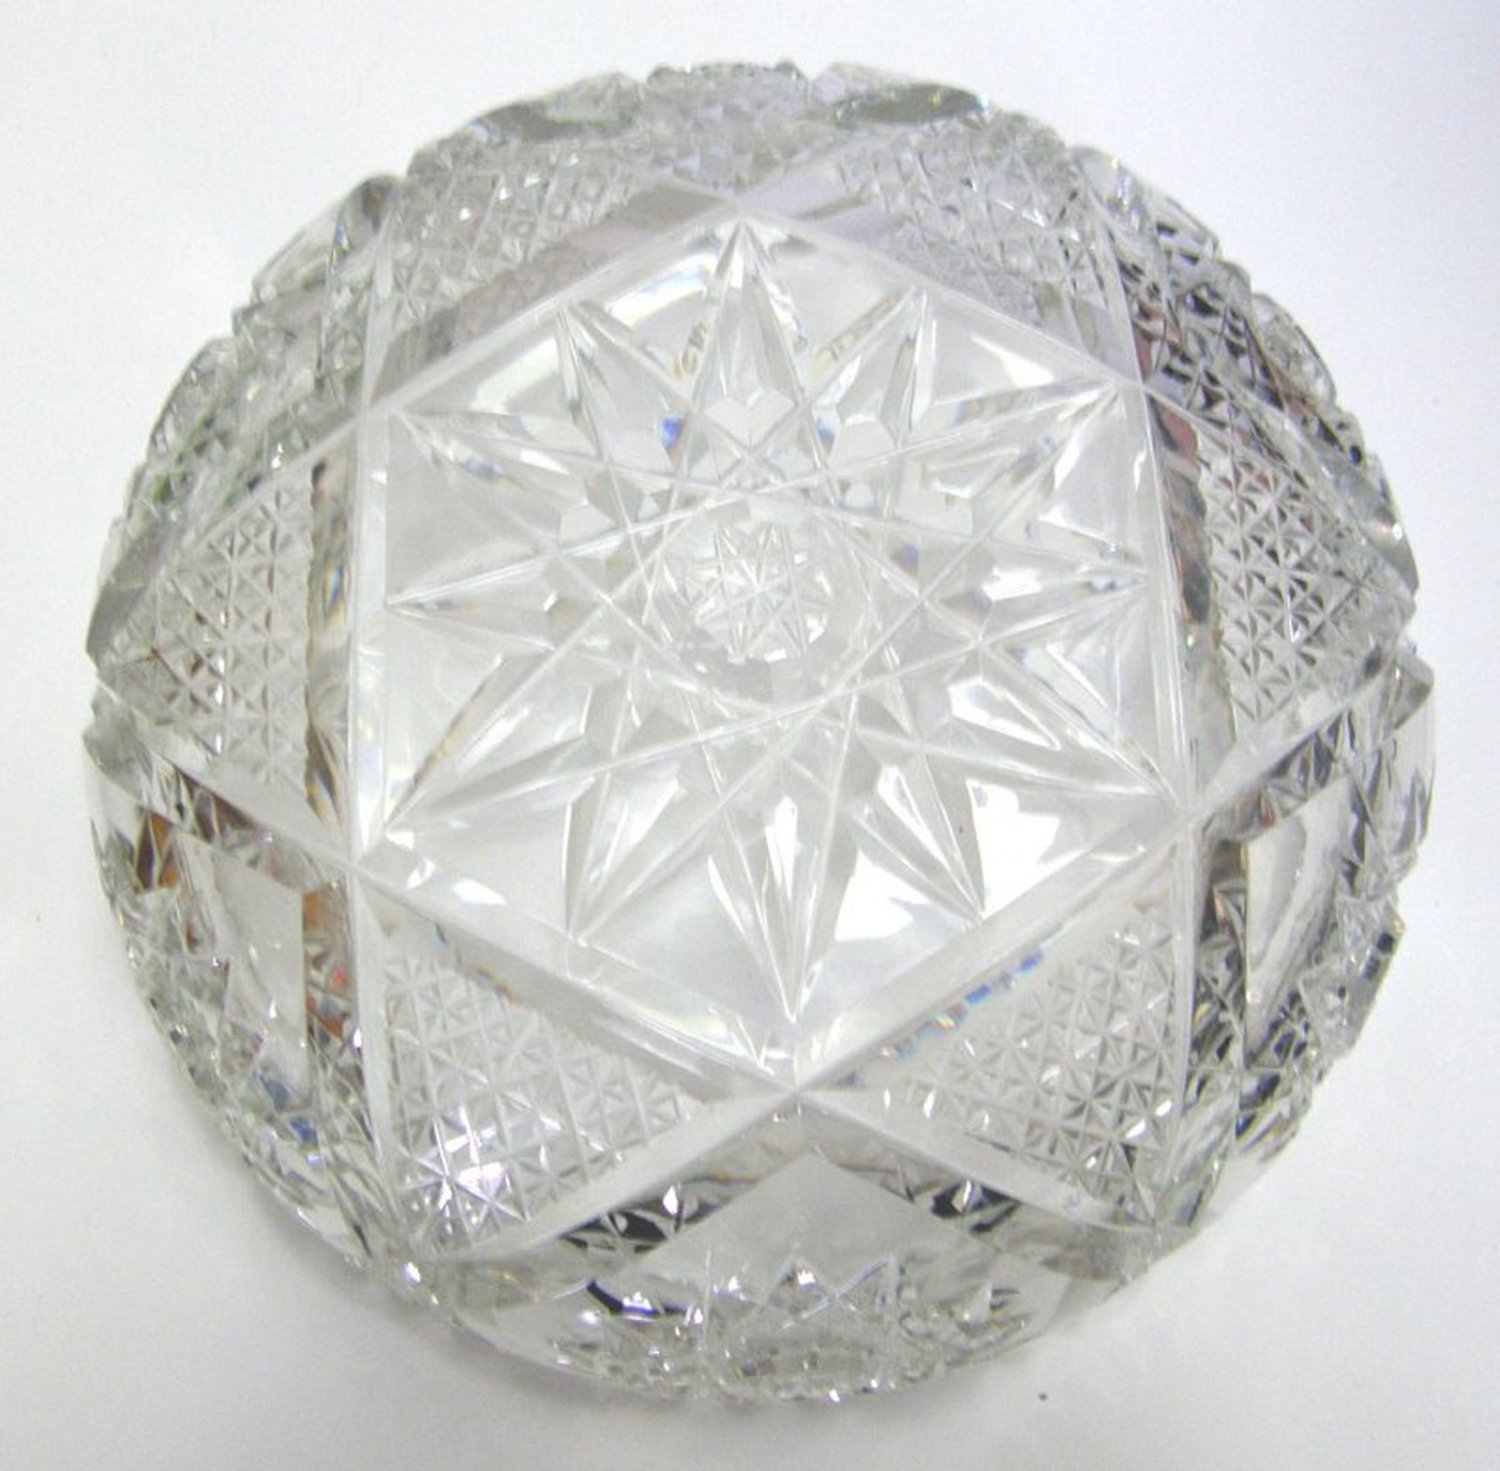 Crystal Abp Serving Bowl Star Of David Pattern With Hobstars And Fans